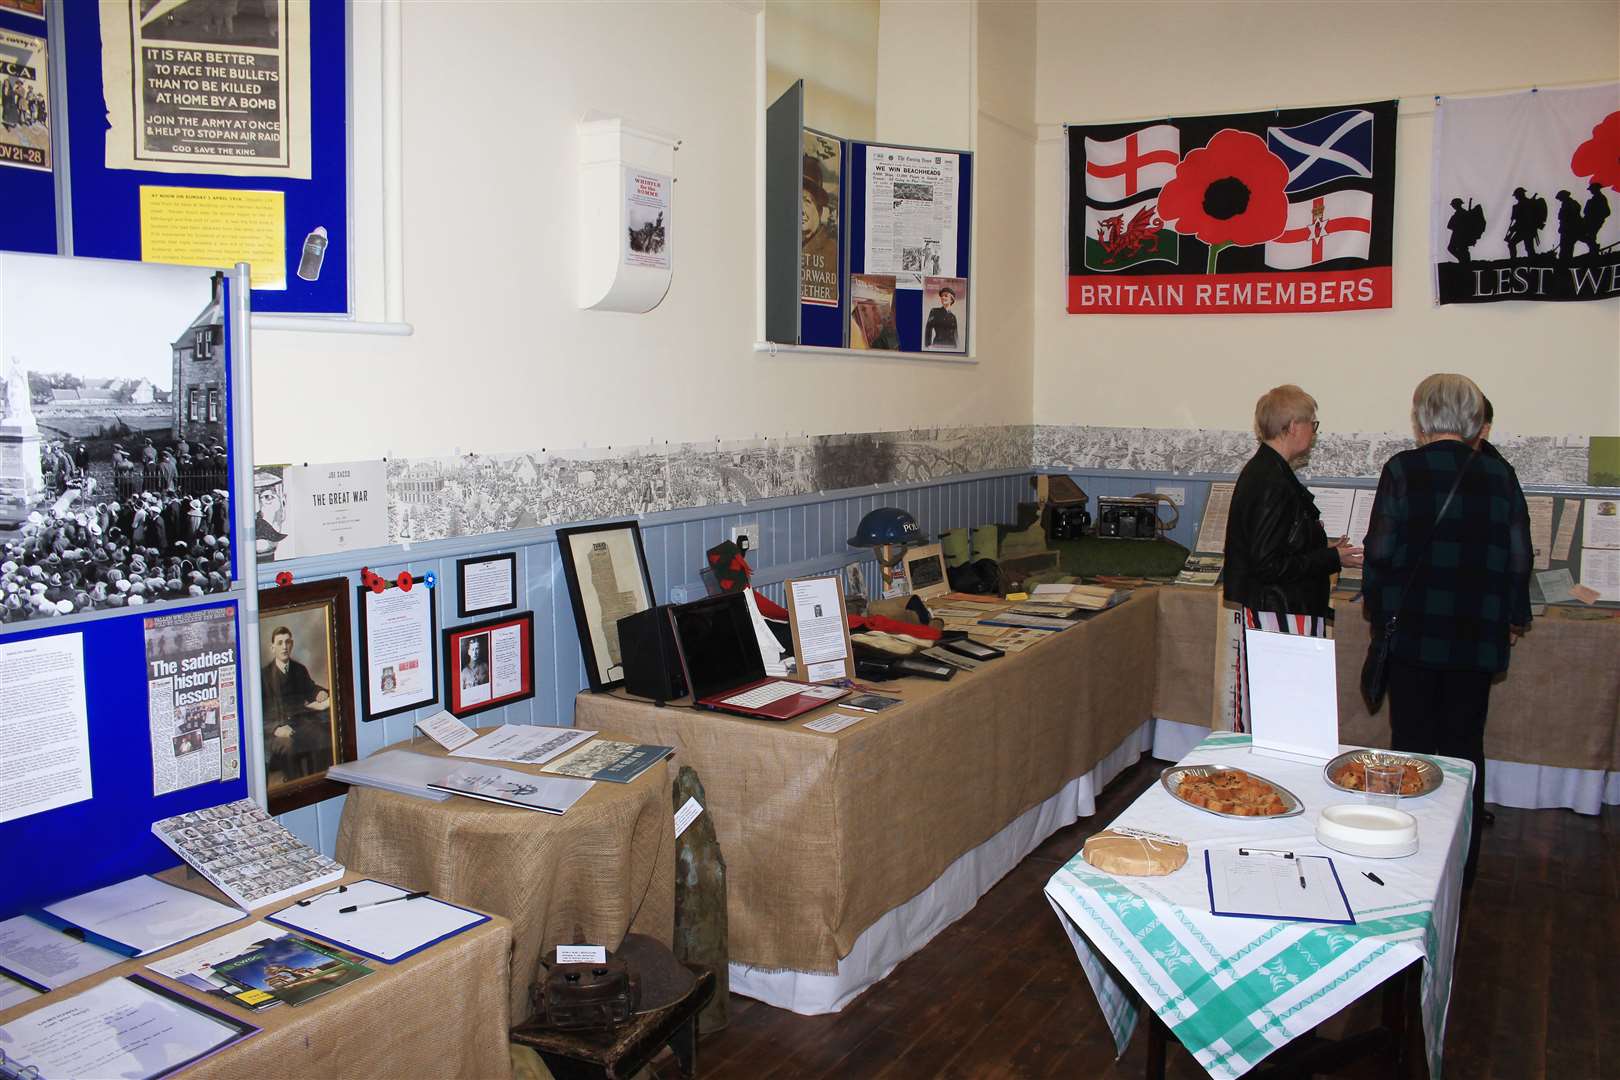 Visitors discussing some of the war exhibits.